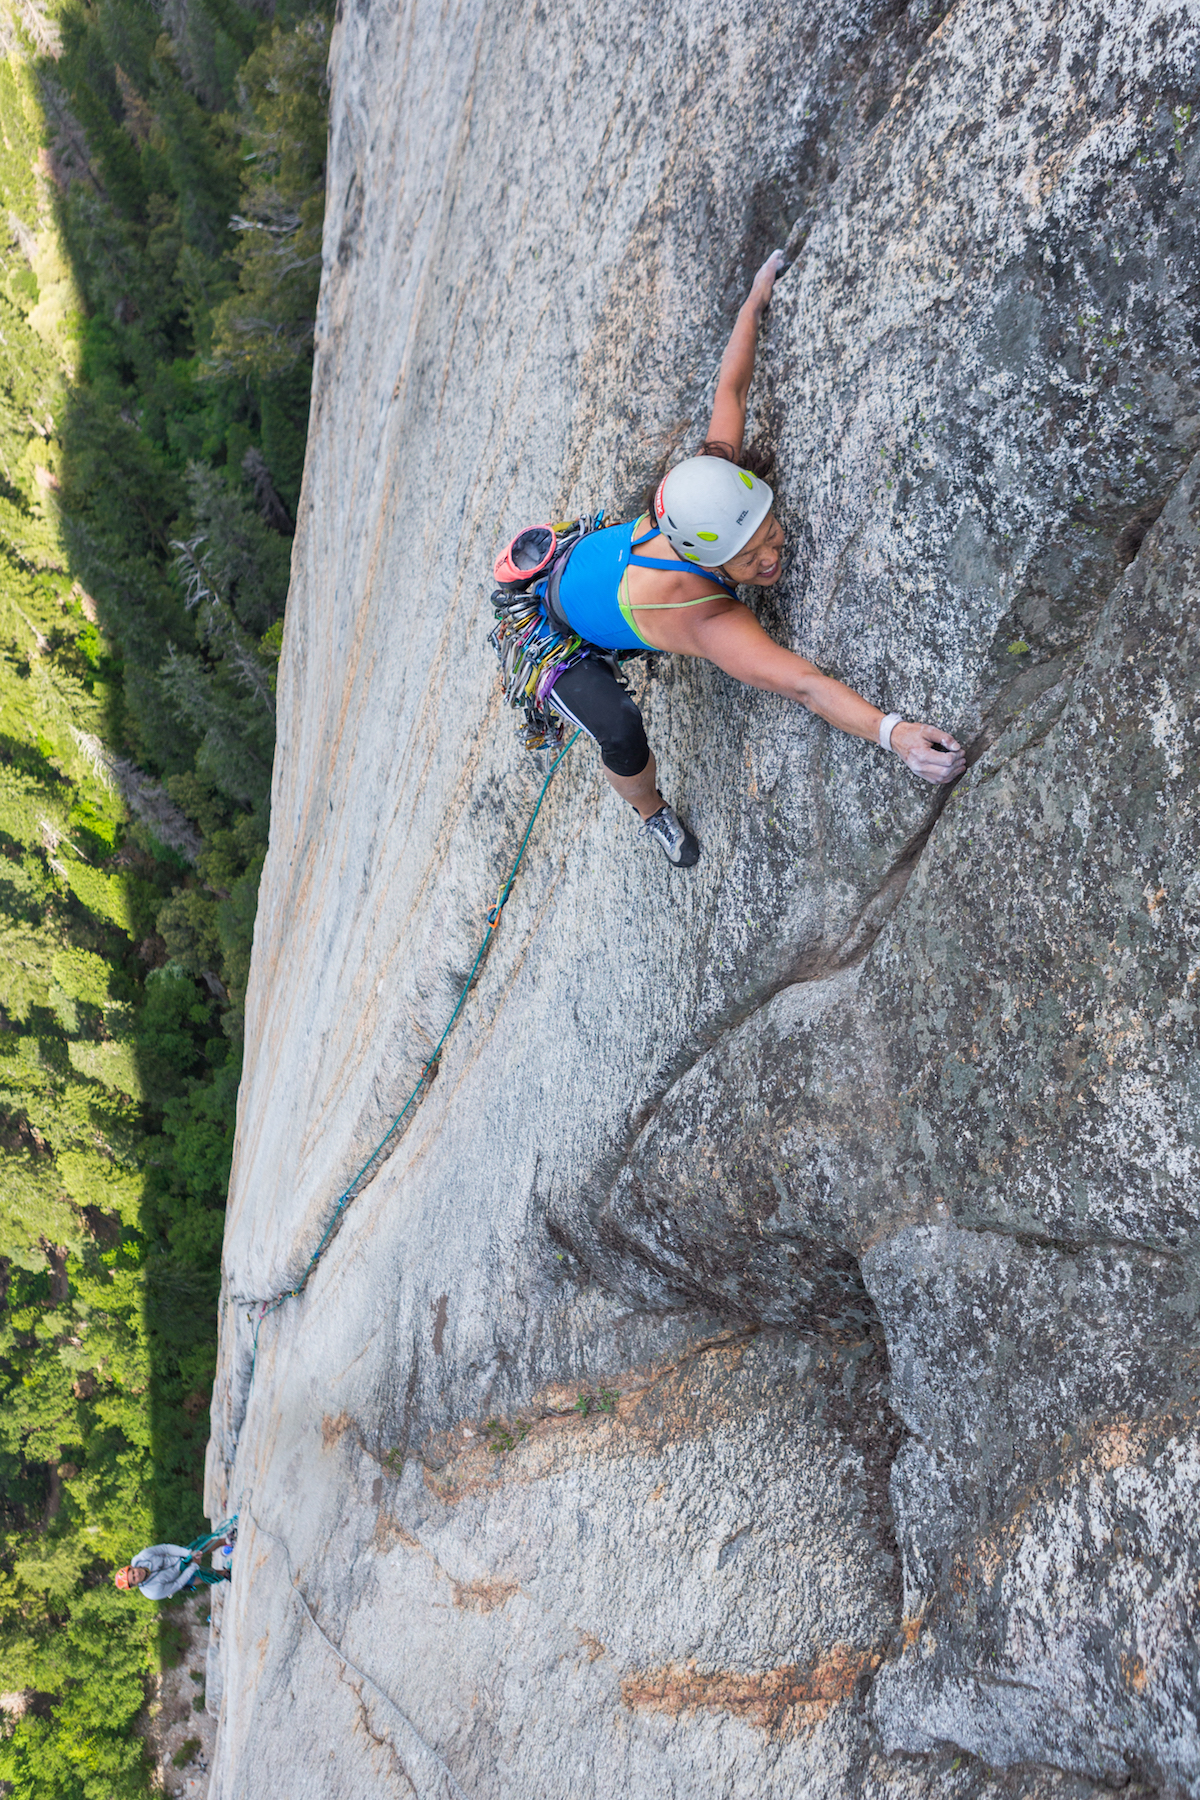 Rita Shin fires Cosmic Girl (5.12+, 1,200') on Yosemite's Middle Cathedral. The route starts on the Chouinard-Pratt route--which is the same start as the modern version of the extremely popular Central Pillar of Frenzy (5.9)--but Cosmic Girl continues straight up where the Central Pillar traverses left into another crack system. [Photo] John Evans